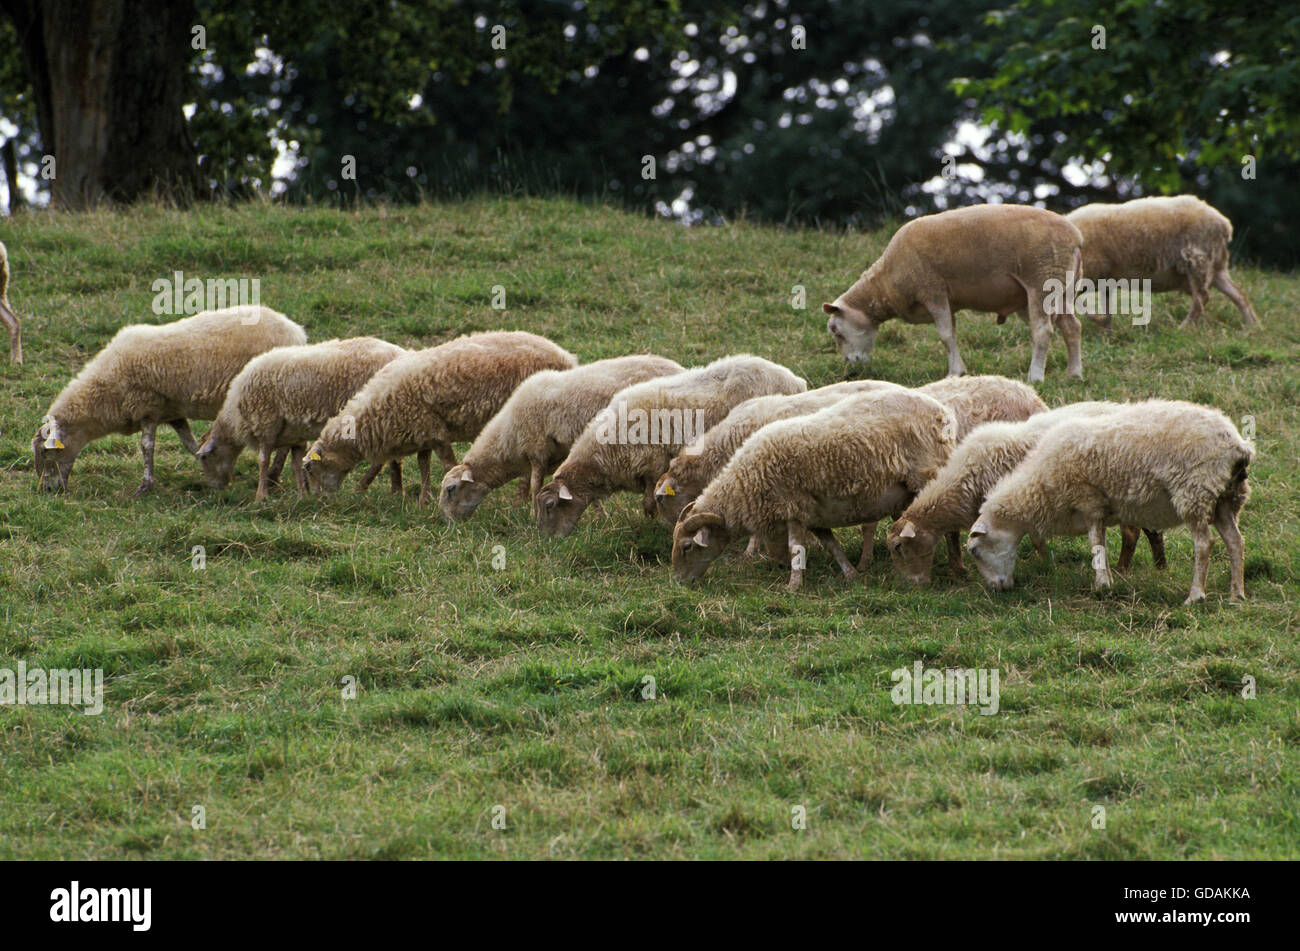 MANECH A TETE ROUSSE SHEEP, A FRENCH BREED, HERD EATING GRASS Stock Photo